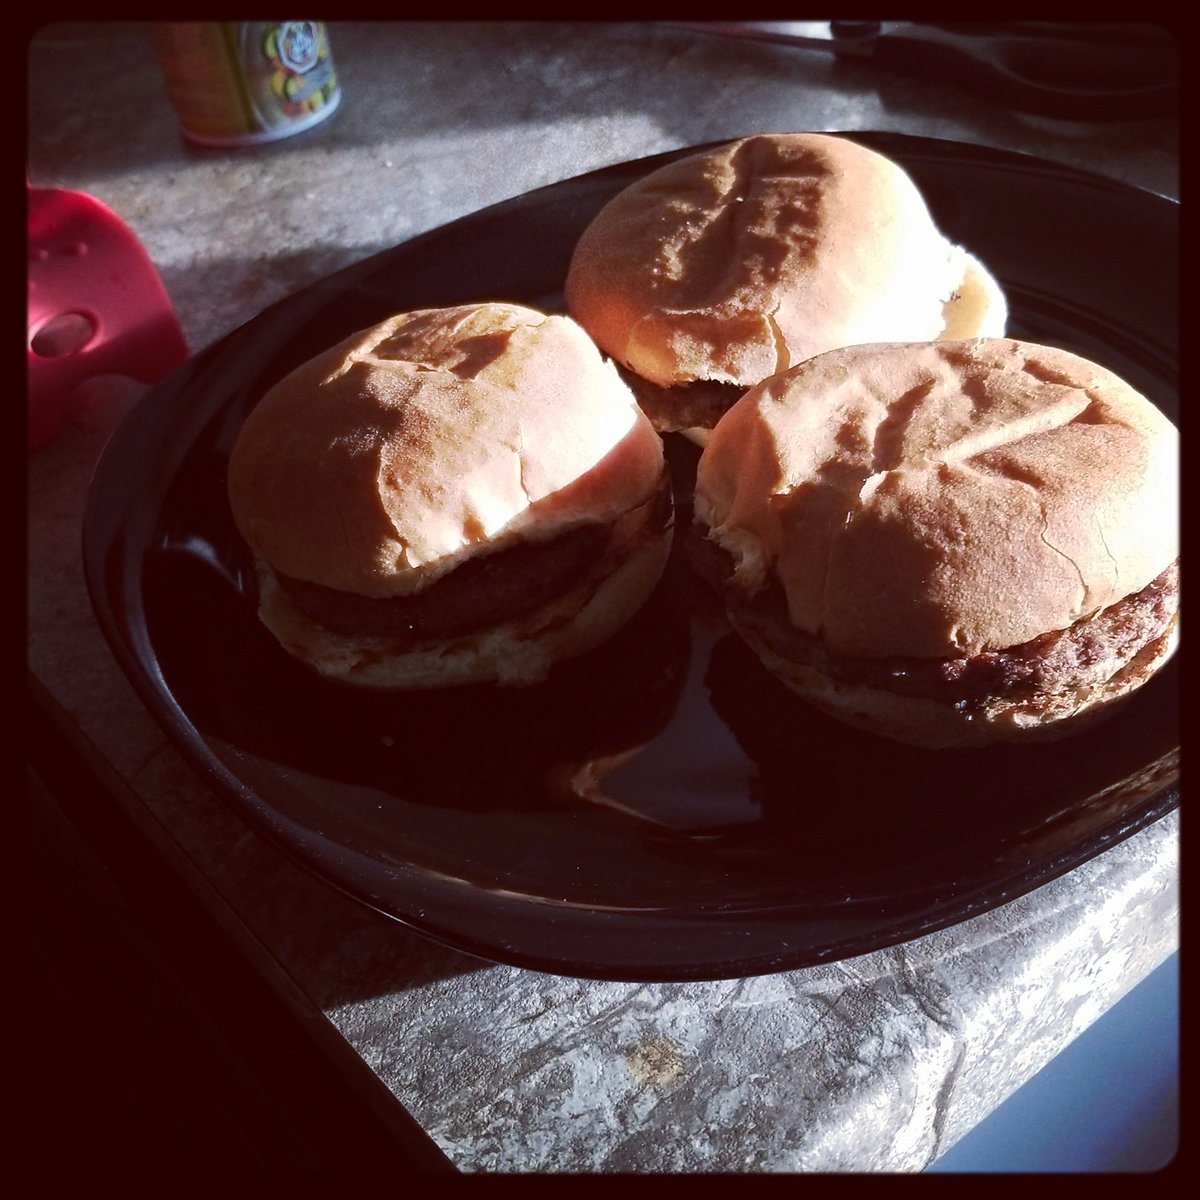 What's better then working @mitchellwhale? NOTHING, but these burger are a close second! 
#bbq #burgers #backyardcooking #insurance #carinsurance #autoinsurance #digitalbroker